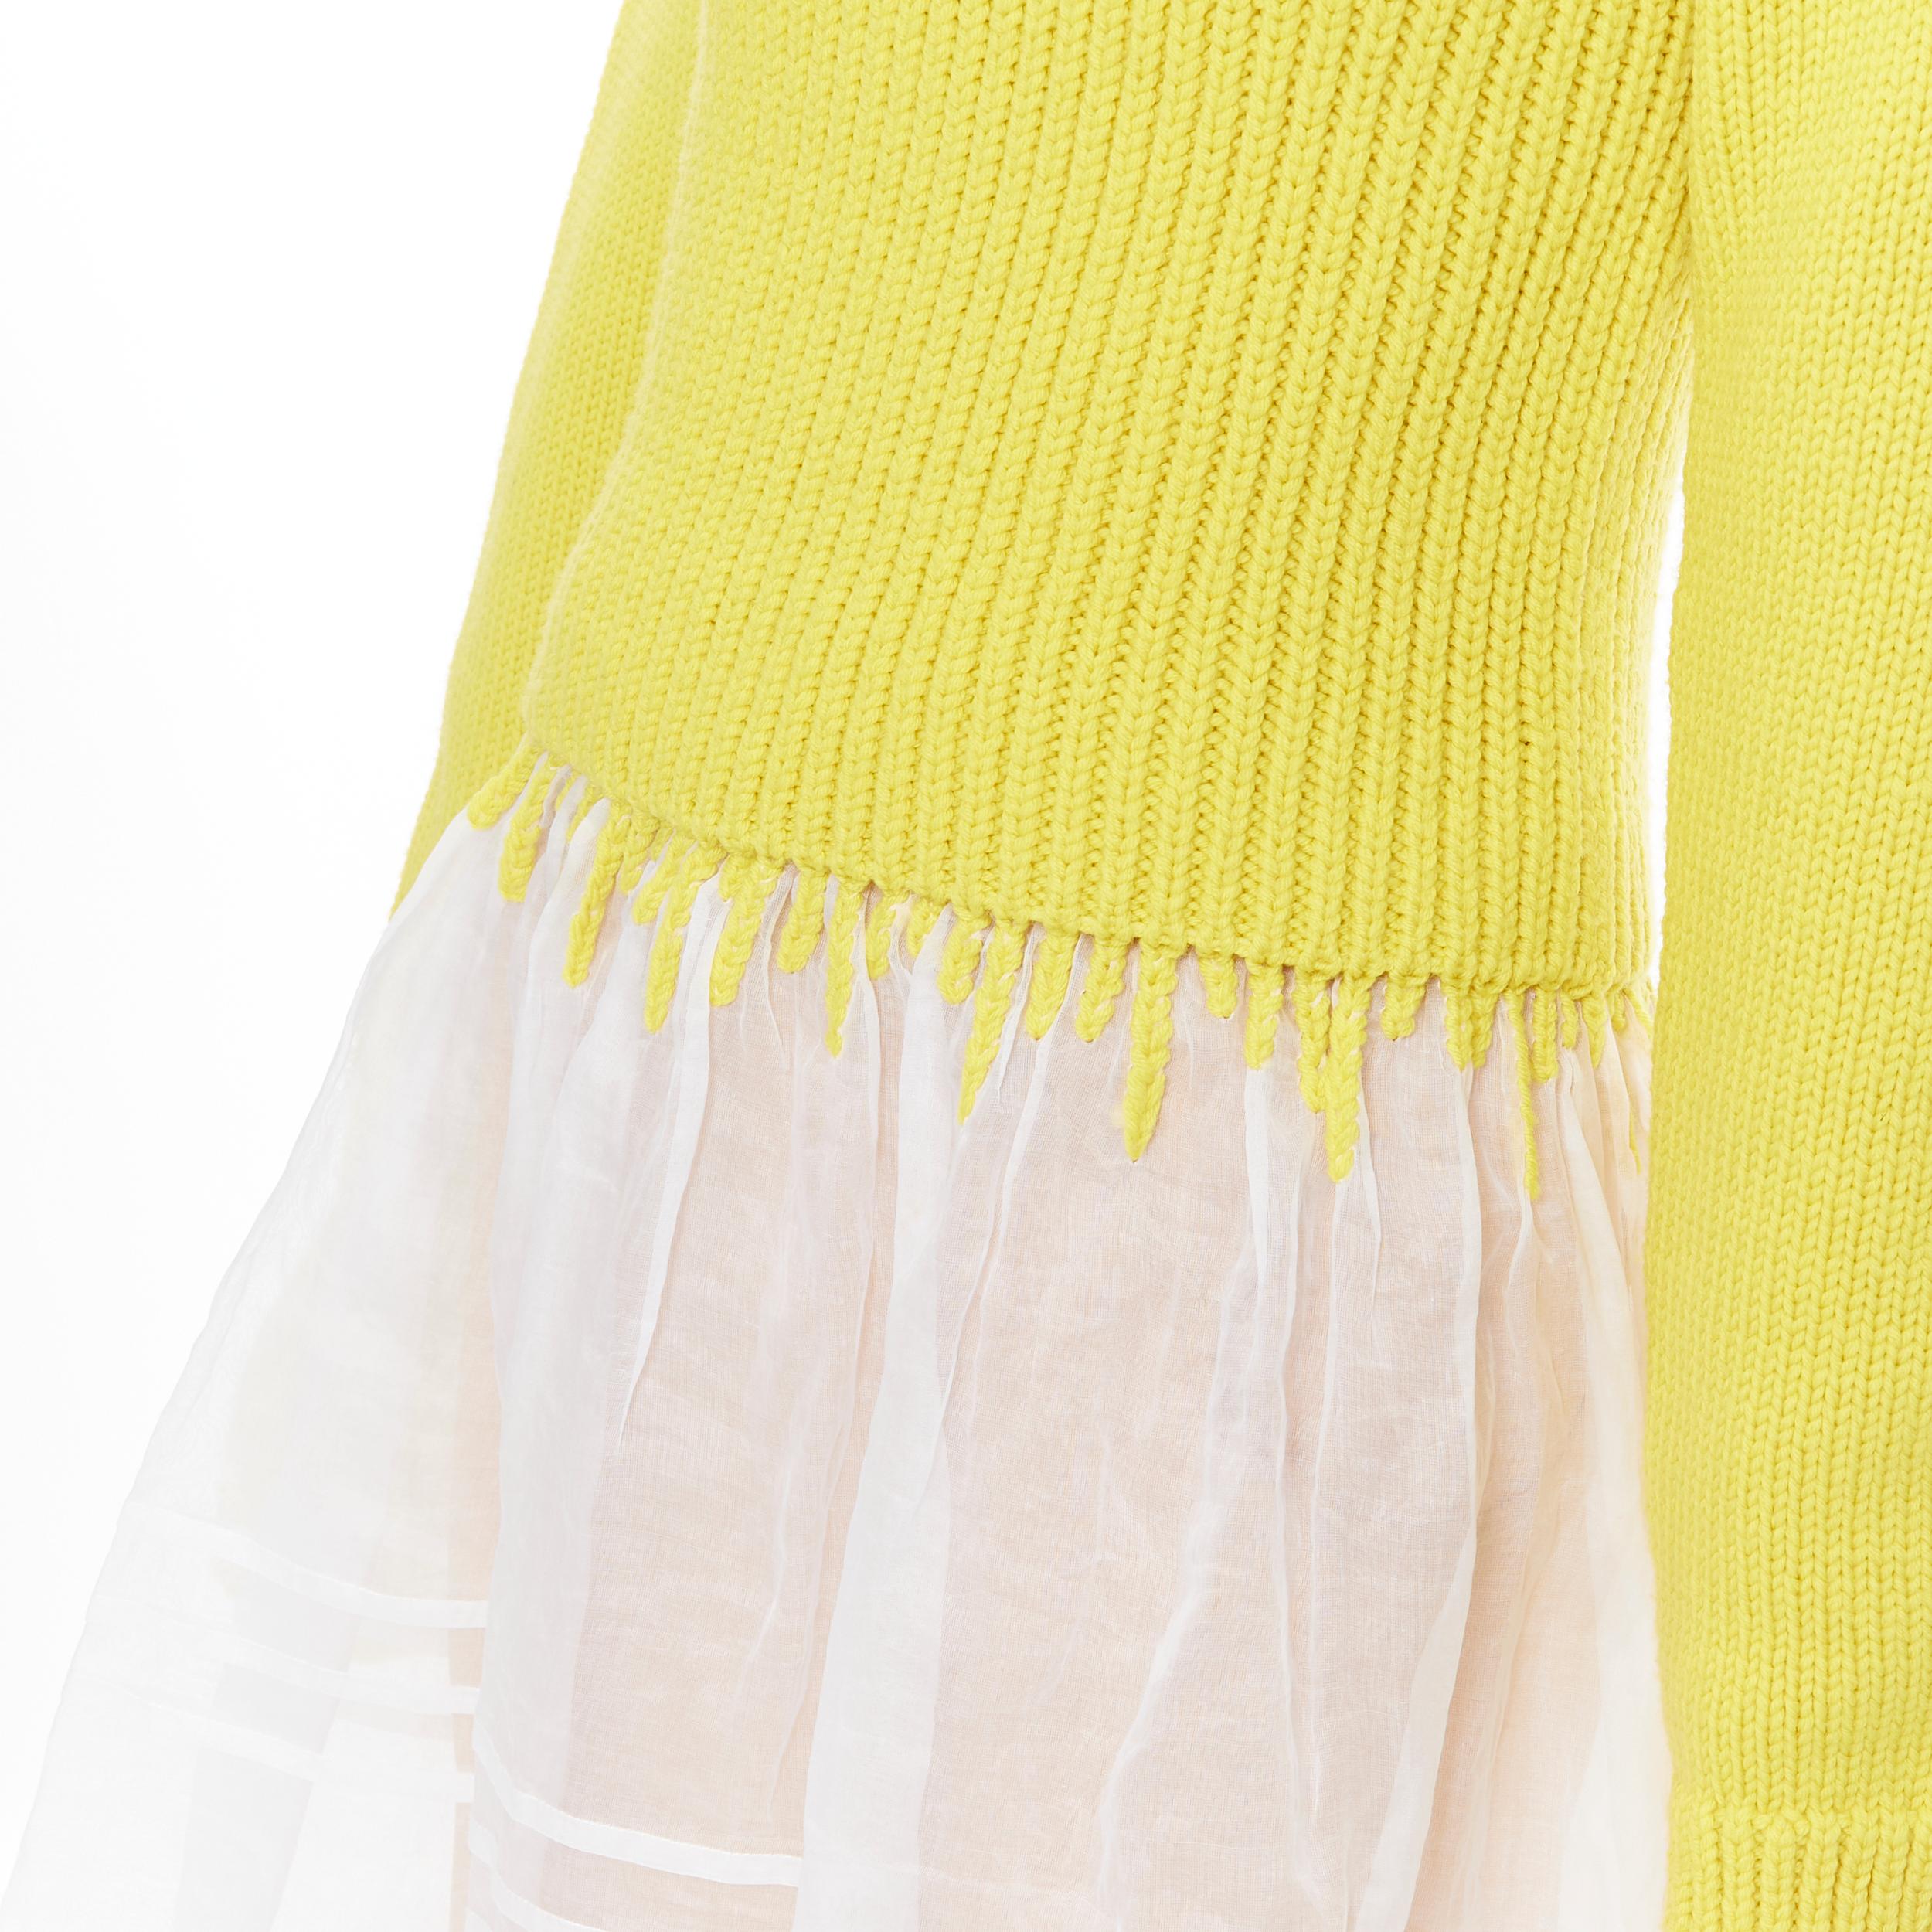 new LOEWE yellow wool chunky knit turtleneck sweater sheer skirt dress M 
Reference: TGAS/B01051 
Brand: Loewe 
Designer: JW Andersdon 
Material: Wool 
Color: Yellow 
Pattern: Solid 
Extra Detail: Detachable nude slip camisole dress. 
Made in: Italy